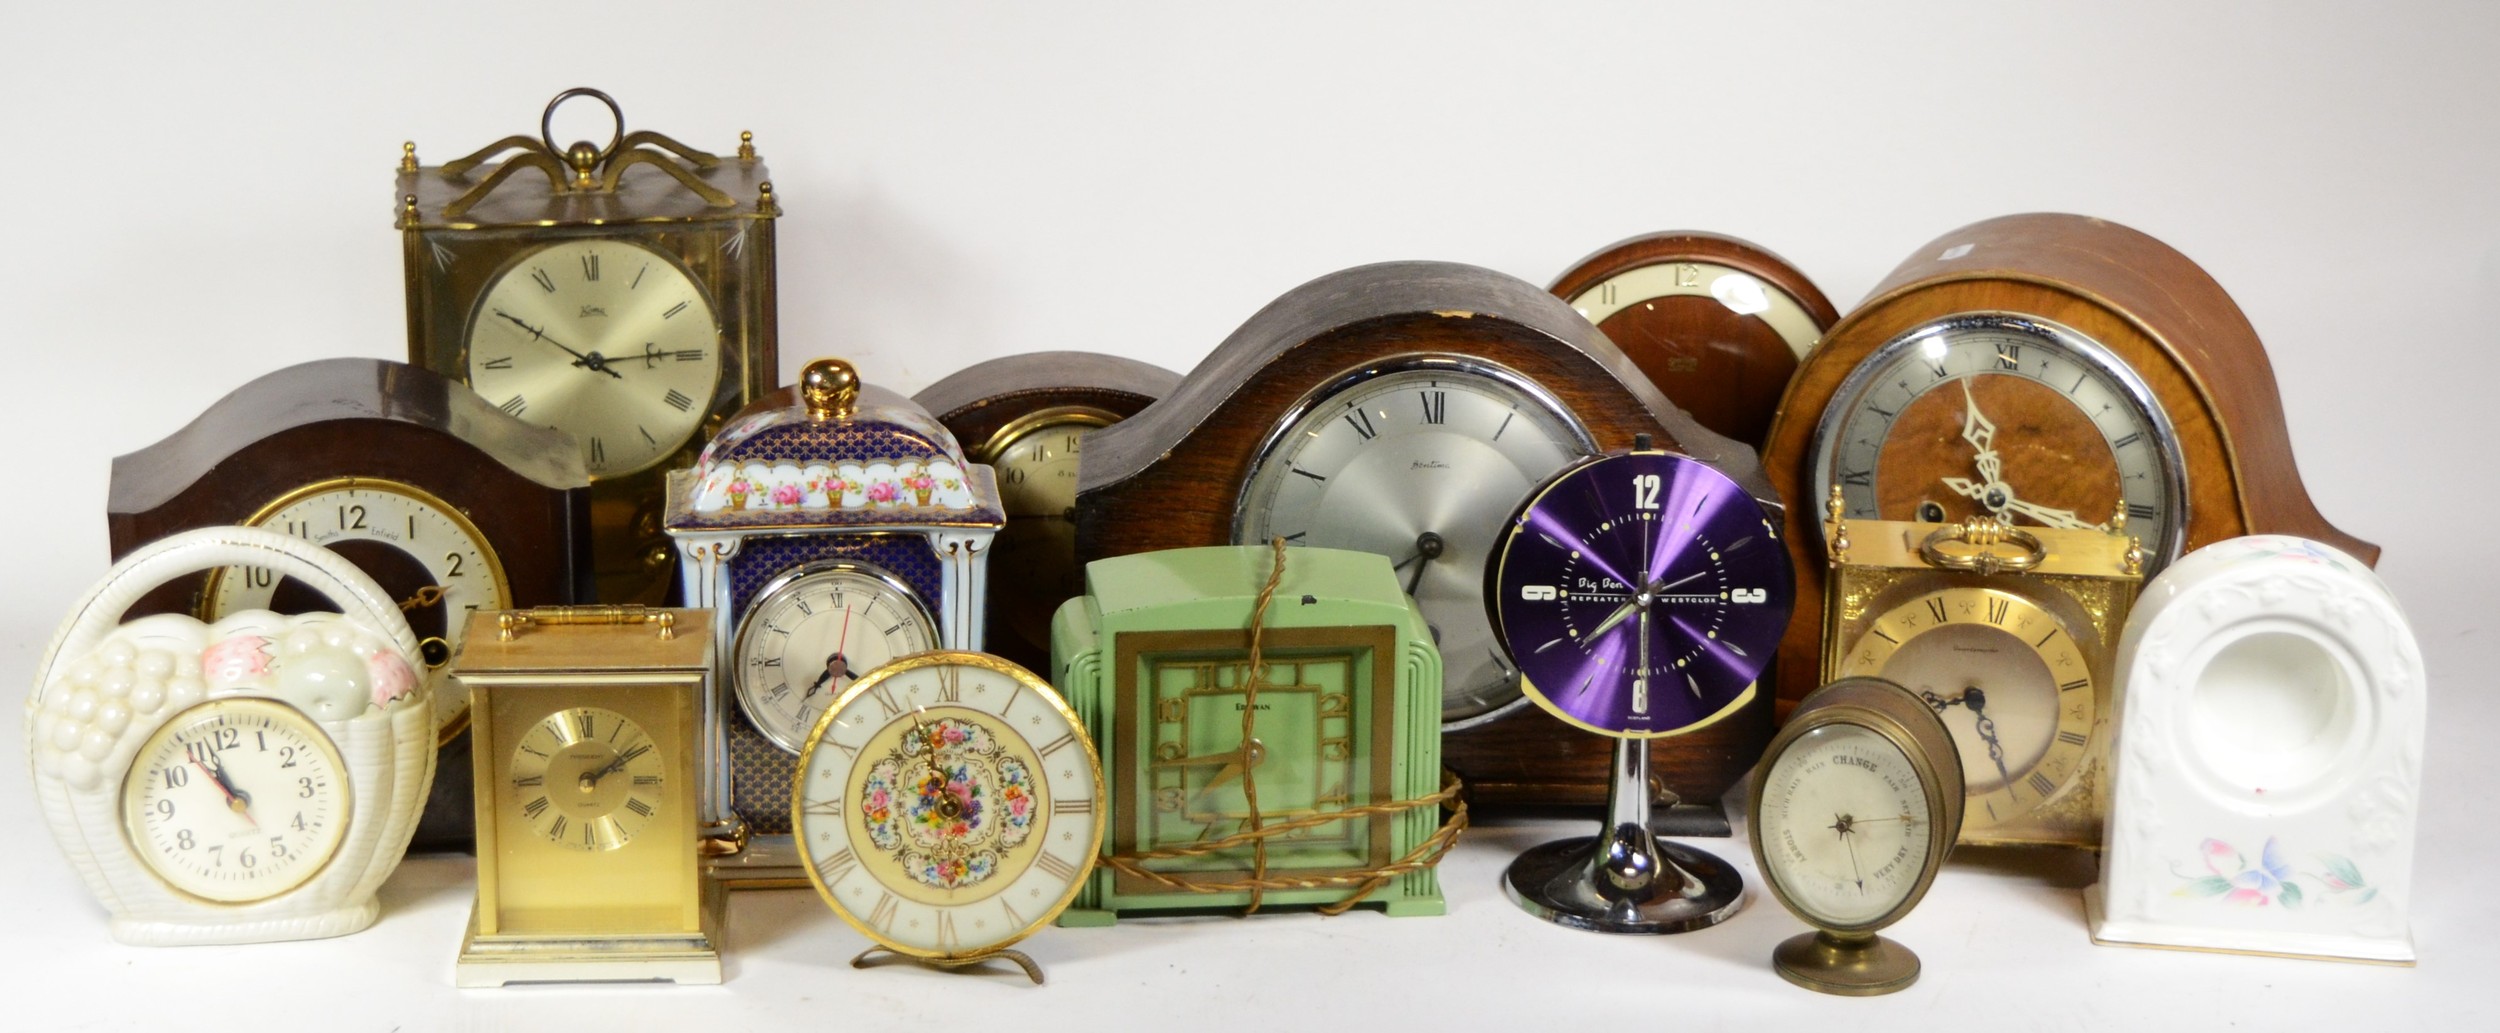 A collection of mid 20th century and later mantel clocks, having manual and quartz movements, in - Image 3 of 3